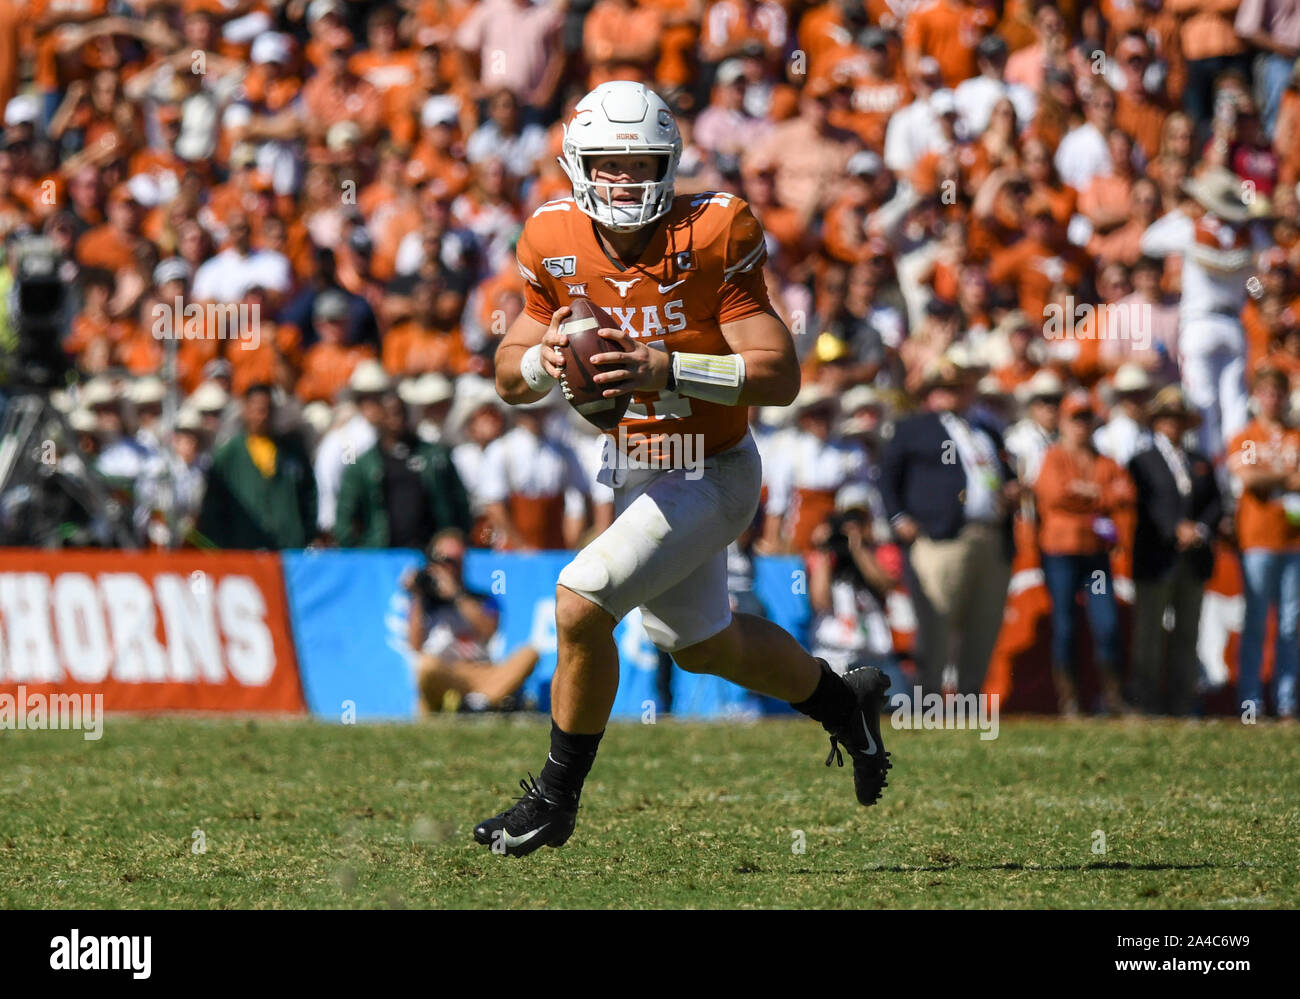 Oct 12, 2019: Texas Longhorns quarterback Sam Ehlinger #11 passed for 210 yards during the NCAA Red River Rivalry game between the University of Oklahoma Sooners and the University of Texas Longhorns at the Cotton Bowl Stadium at Fair Park in Dallas, TX Oklahoma defeated 34-27 Albert Pena/CSM Stock Photo